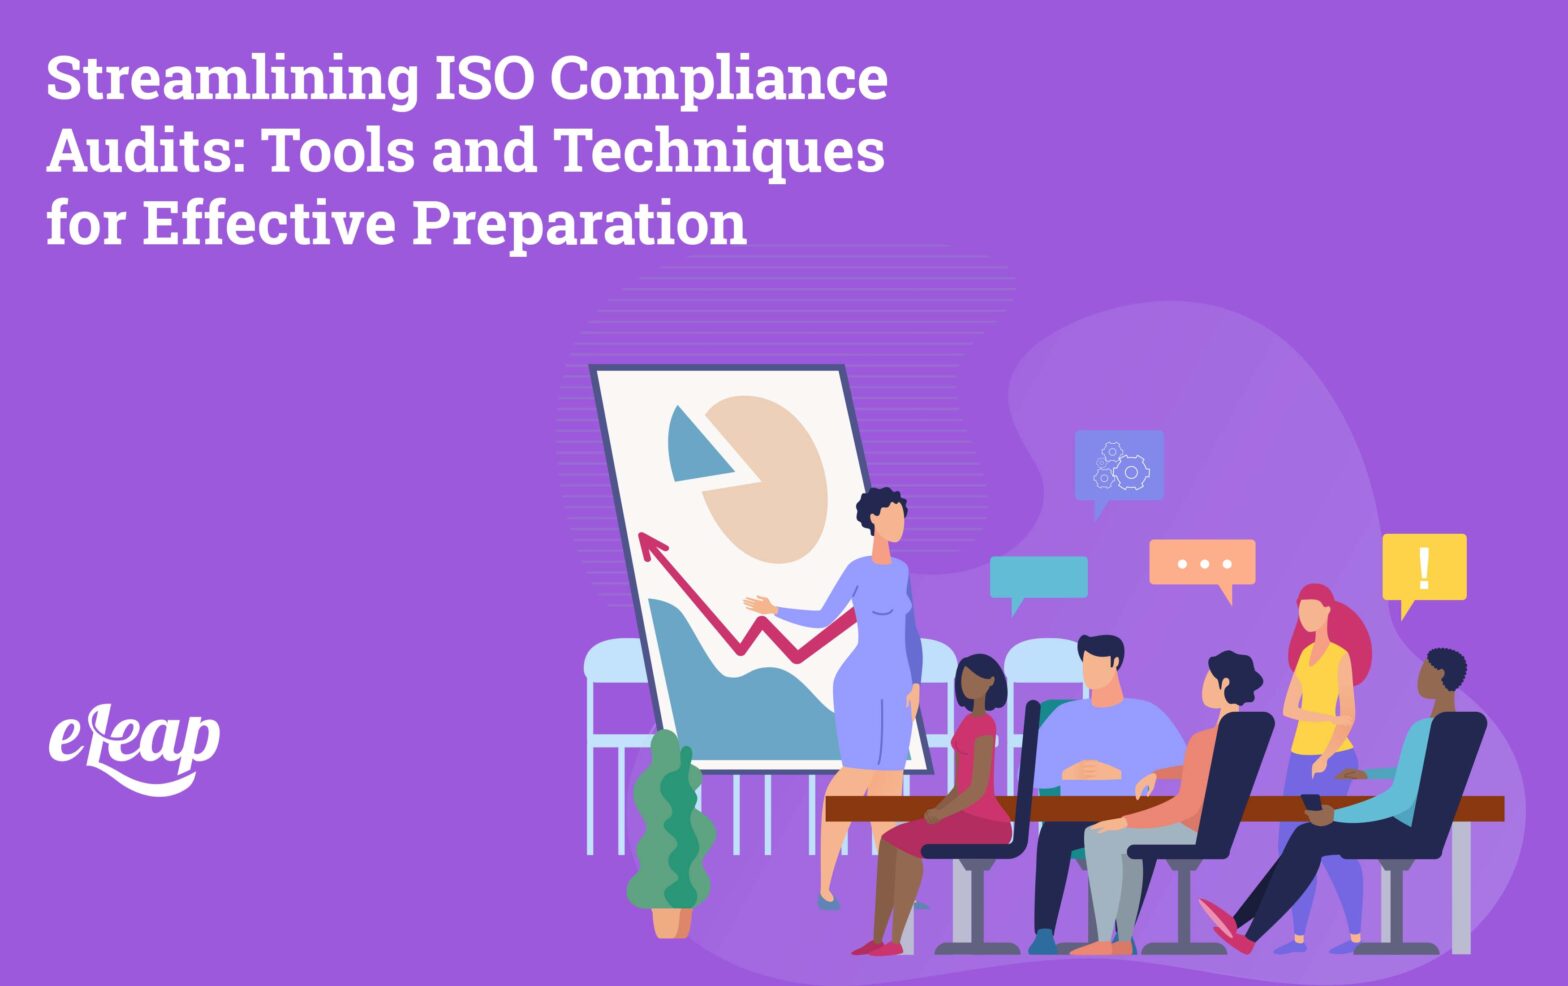 Streamlining ISO Compliance Audits: Tools and Techniques for Effective Preparation